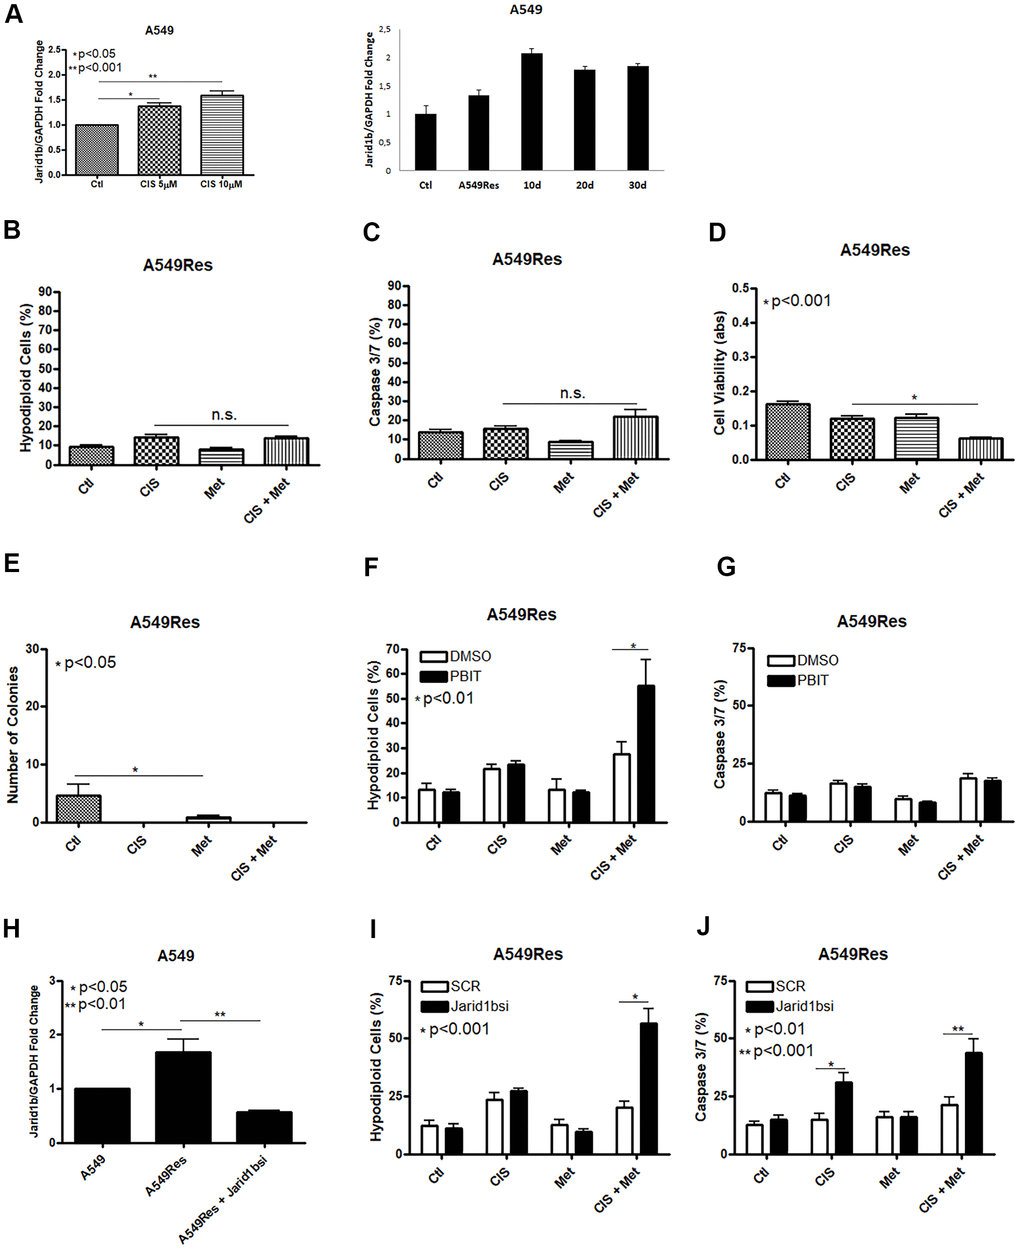 Treatment with sub-lethal dose of cisplatin leads to Jarid1b overexpression and chemoresistance in A549 cells. Sub-lethal treatment with cisplatin in A549 cells increases Jarid1b expression in a dose dependent manner and keeps overexpressed even after 30 days post-treatment (A). A549Res cells become resistant to the combined treatment between metformin and cisplatin as no improvement in DNA fragmentation (B), caspase 3 and 7 activation (C) can be seen. Only through cell viability assay showed some difference in the metformin and cisplatin combination (pD). Metformin decreased the number of colonies in A549Res cells (pE). Inhibition of Jarid1b by the pharmacological inhibitor PBIT restores the ability of metformin to chemosensitize to cisplatin as measured by DNA fragmentation assay (pF), but caspase 3 and 7 activation was not observed (G). However, inhibition of Jarid1b by siRNA (pH) restores the ability of metformin to chemosensitize to cisplatin through DNA fragmentation (pI) and caspase 3 and 7 activation assay (pJ). Jarid1b inhibition by siRNA, MTT assay, DNA fragmentation and caspase 3 and 7 activation assay data represent the mean of three independent experiments. A549 cells were pre-treated with 10μM of cisplatin for 72 h to generate A549Res cells. After pre-treatment, A549Res cells were treated with 10mM of metformin for 72 h and 25μM of cisplatin (with or without metformin) for another 72 h.